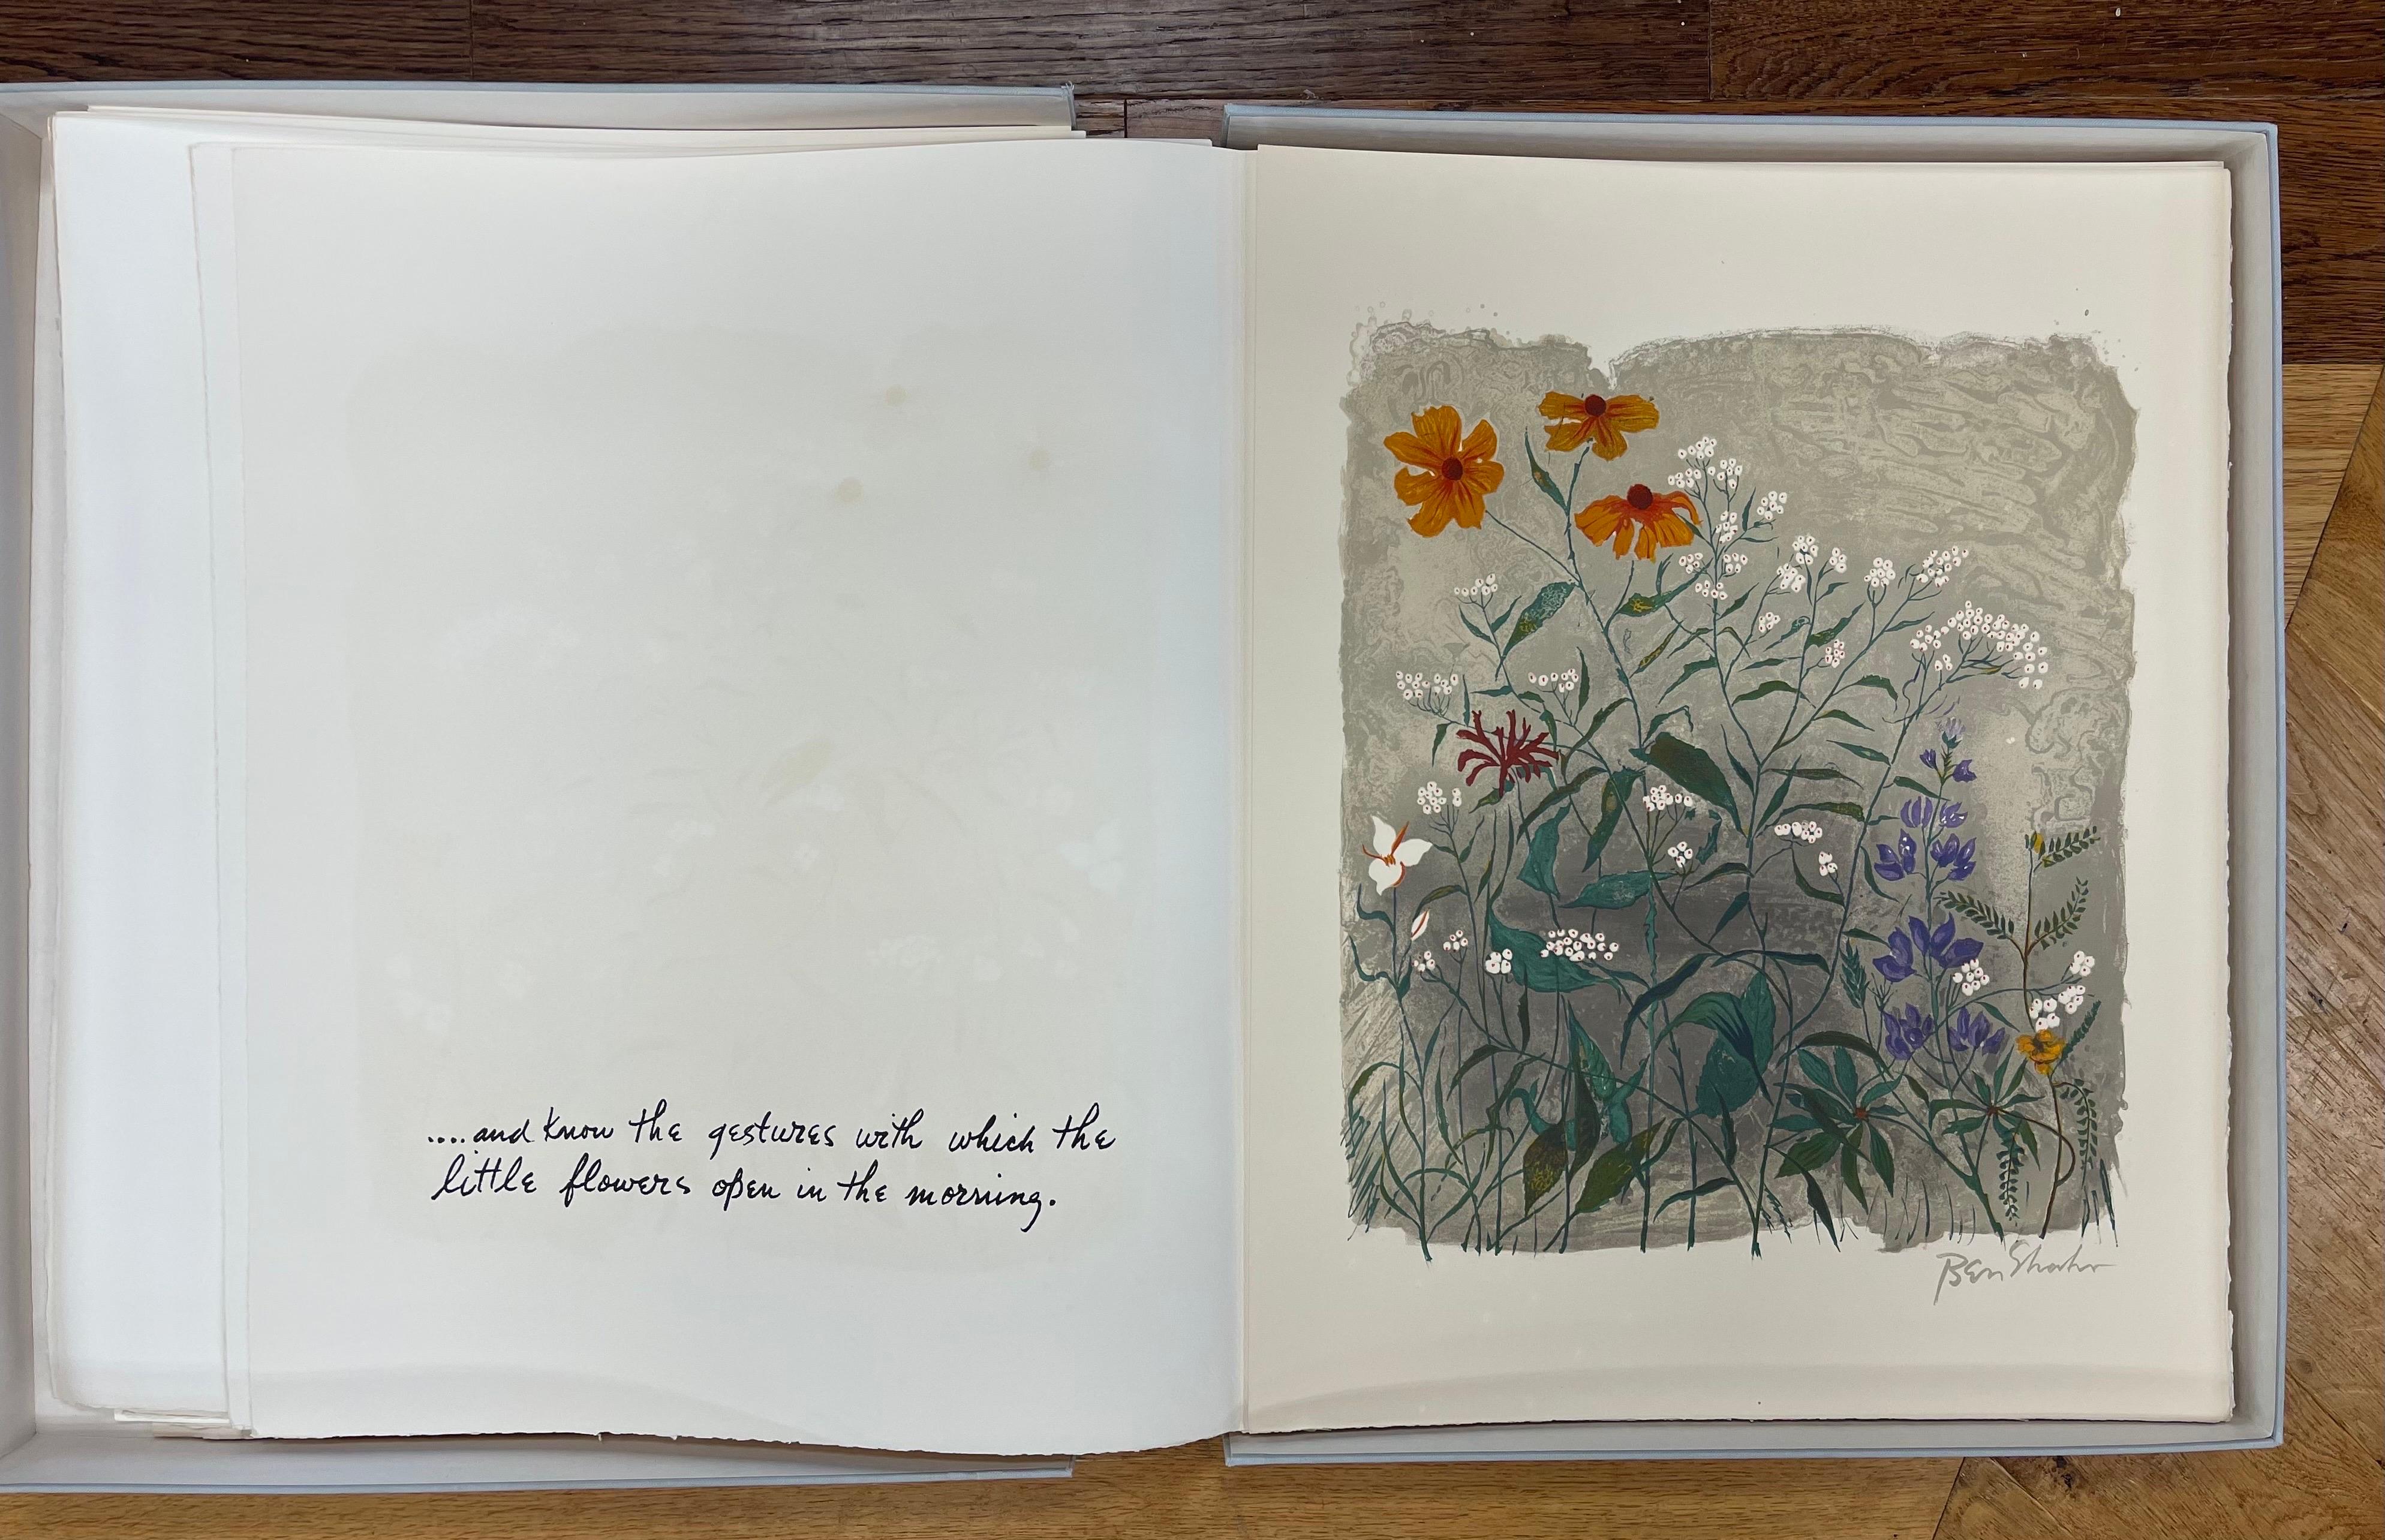 Coveted Ben Shahn Limited Edition Portfolio #234 with 24 Lithographs R. M. Rilke For Sale 10